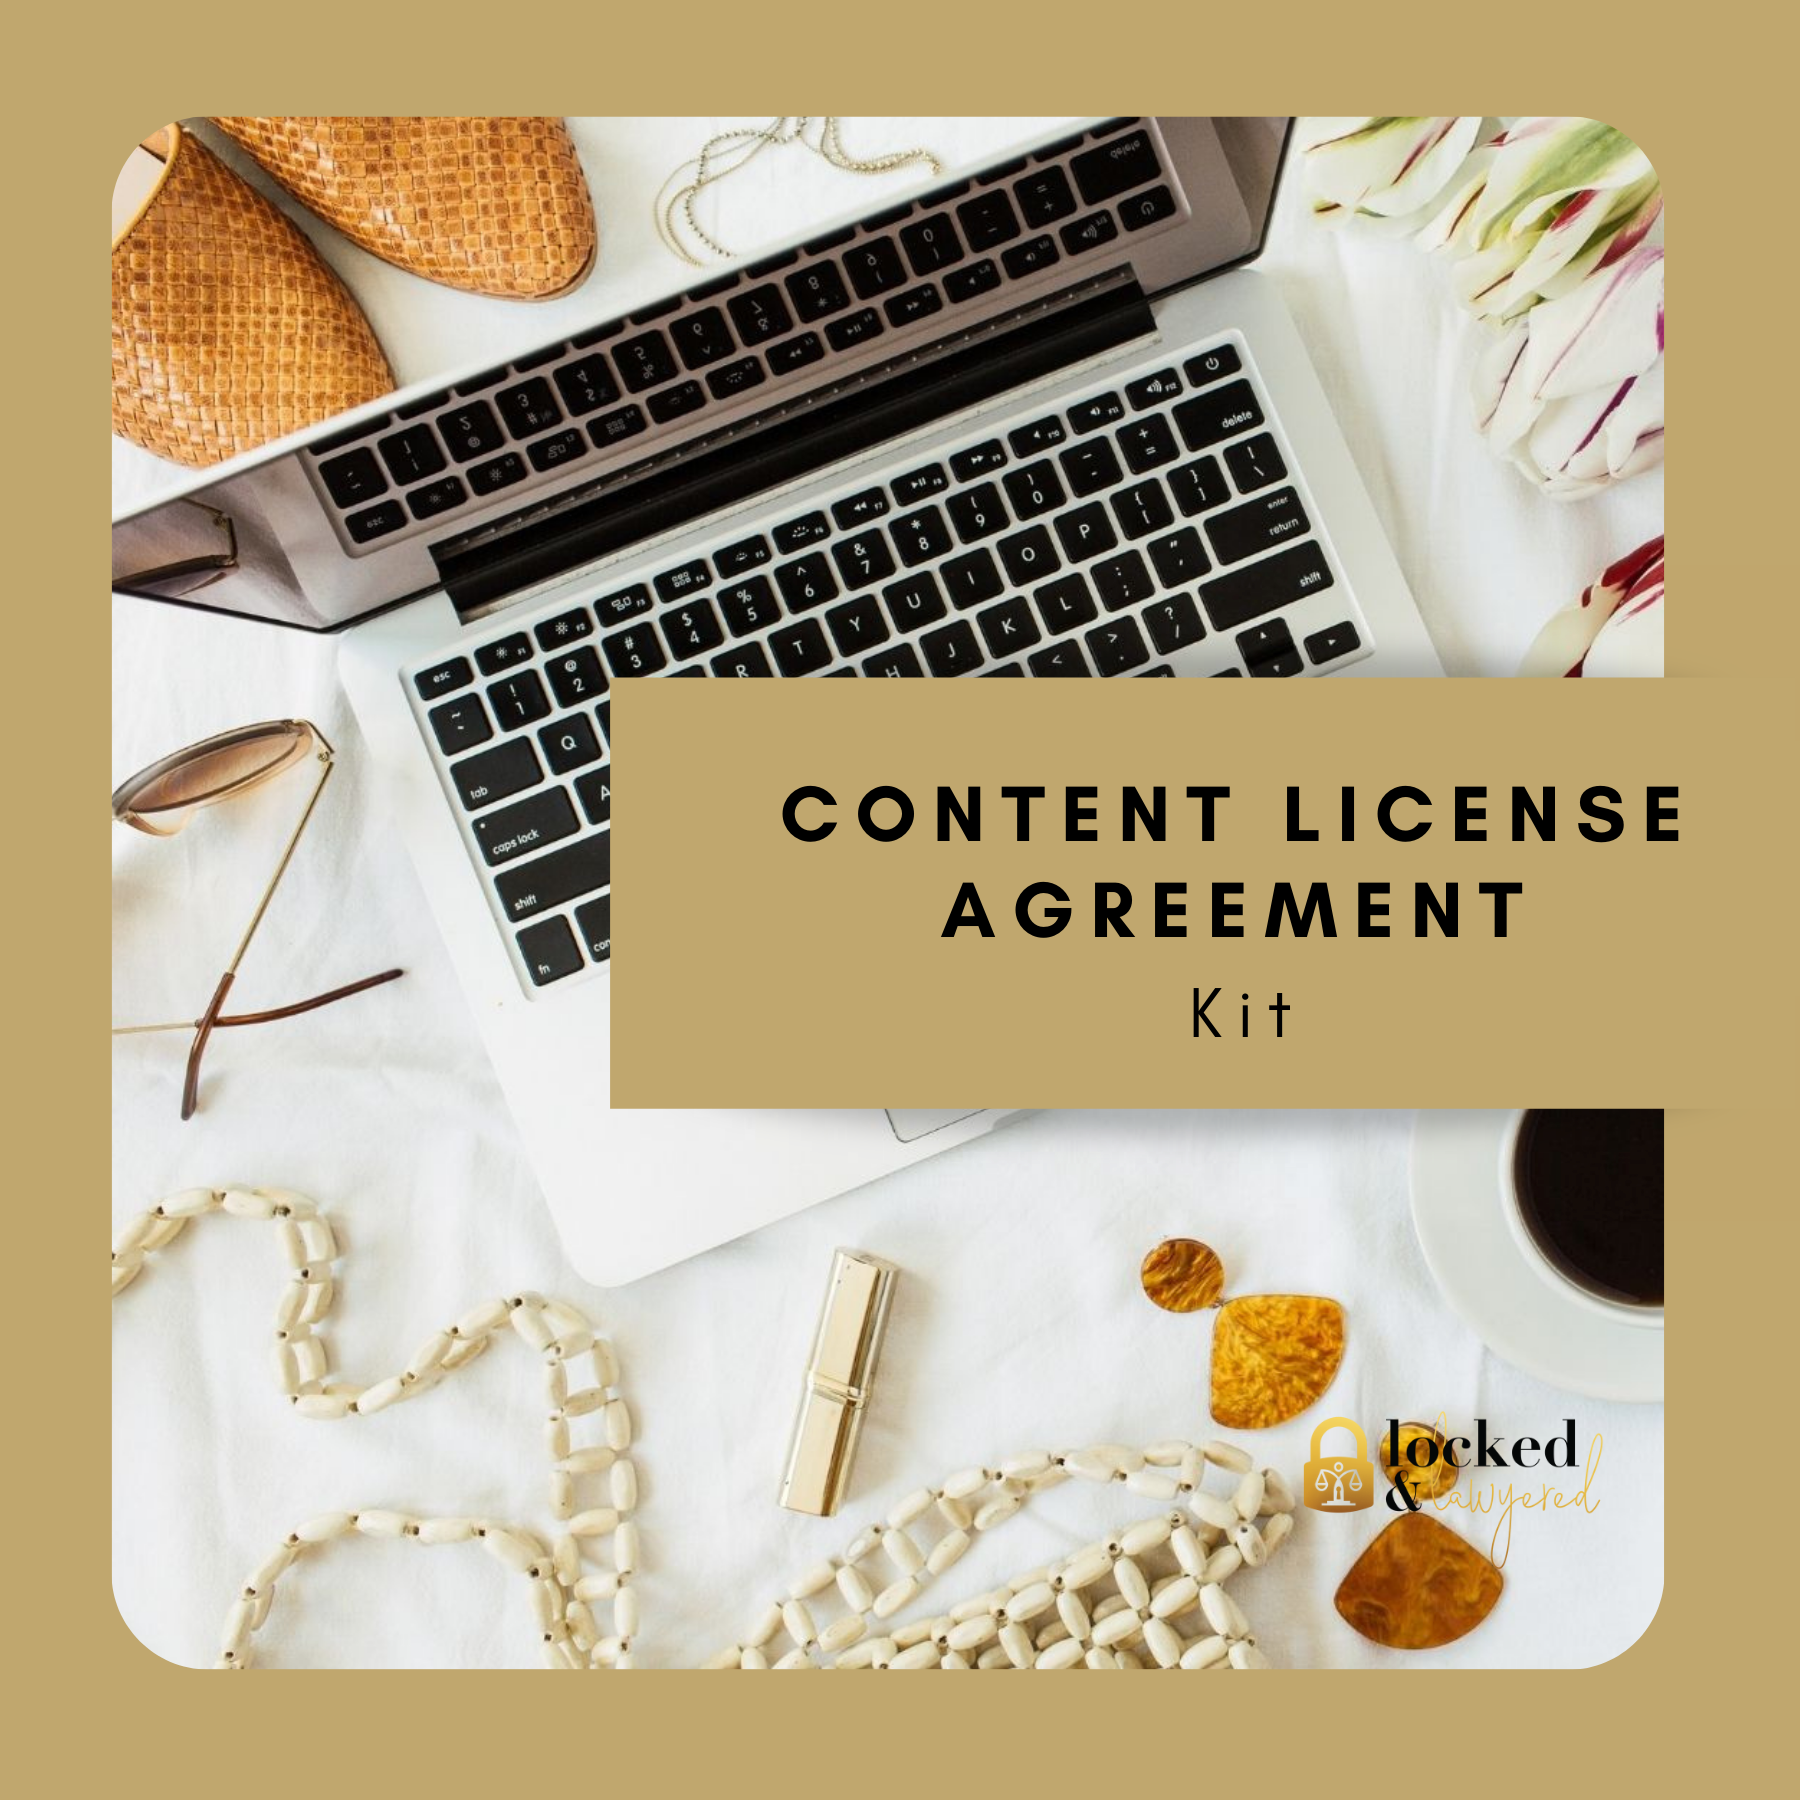 Content License Agreement Kit